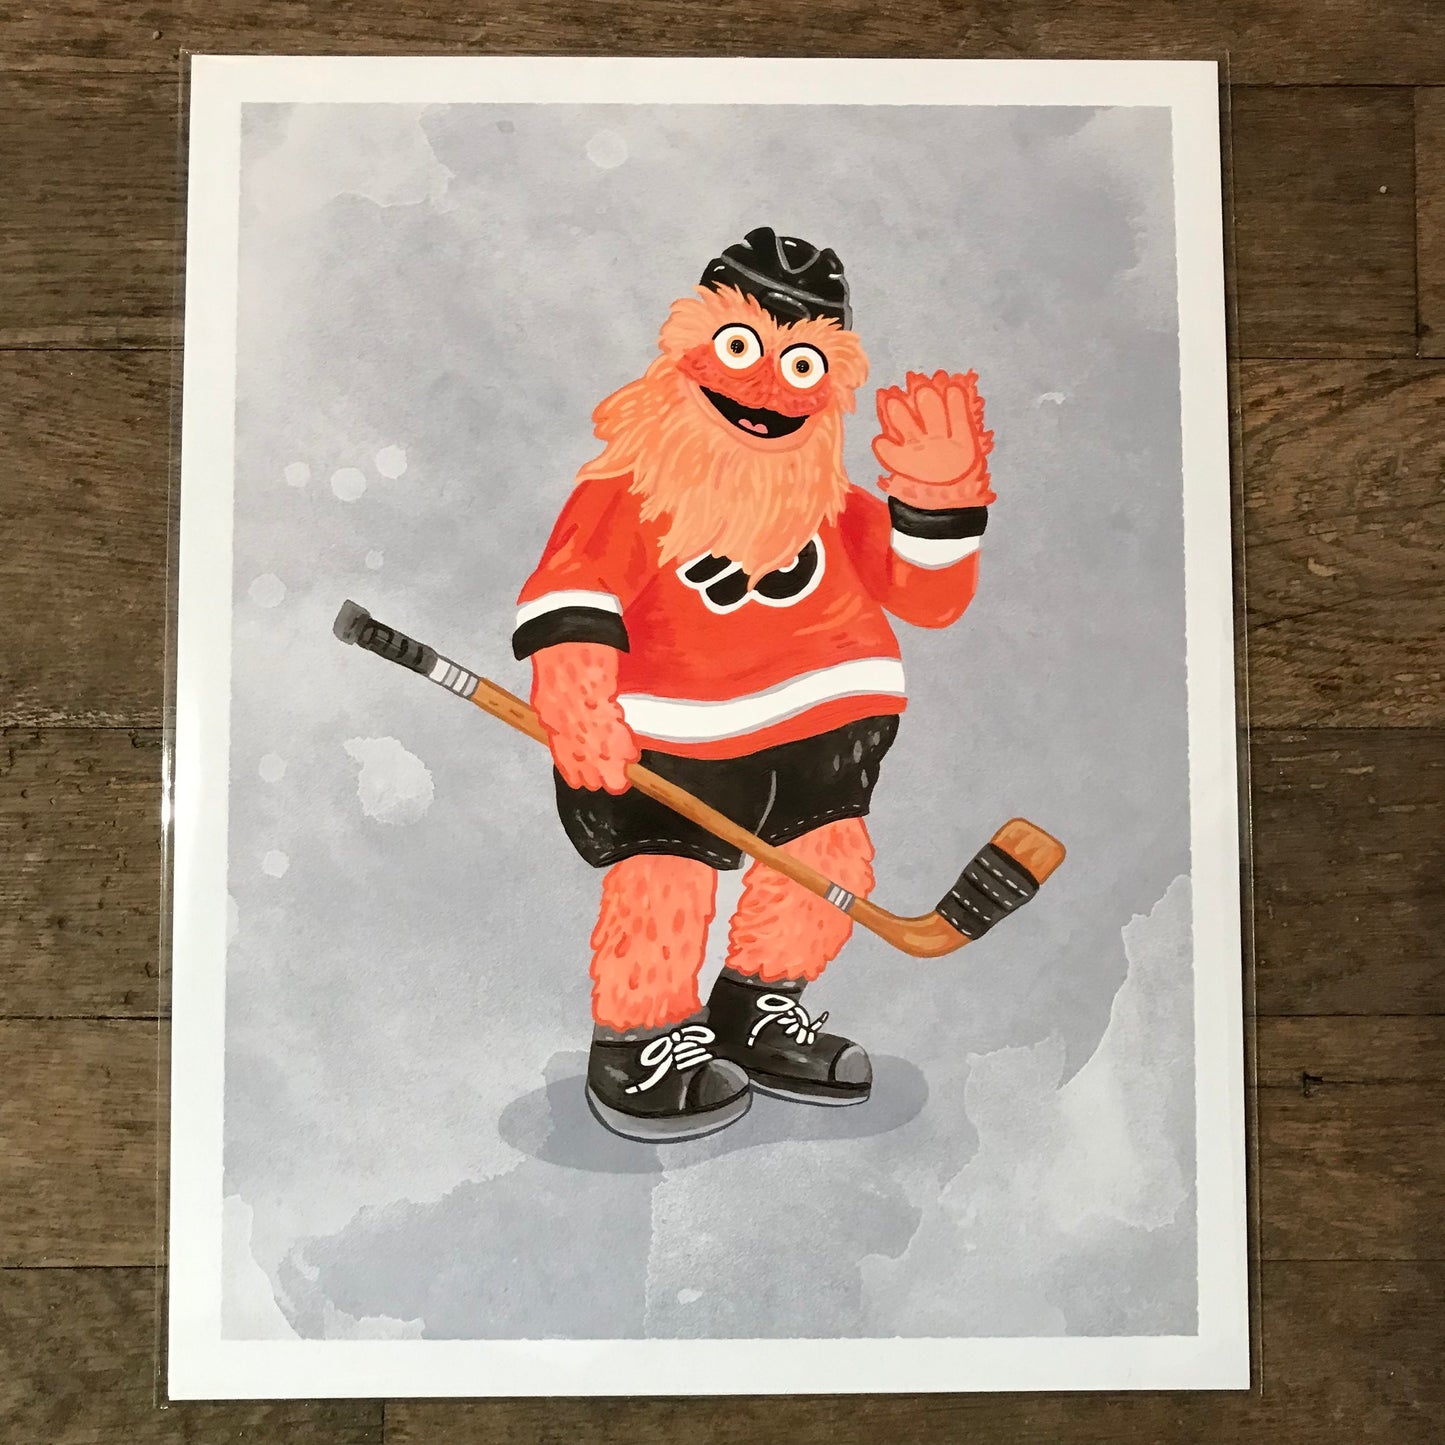 Illustration of a cheerful anthropomorphic orange creature dressed in ice hockey attire, identified as Gritty, waving hello featured on Philly Mascot Prints by Jamie Bendas.